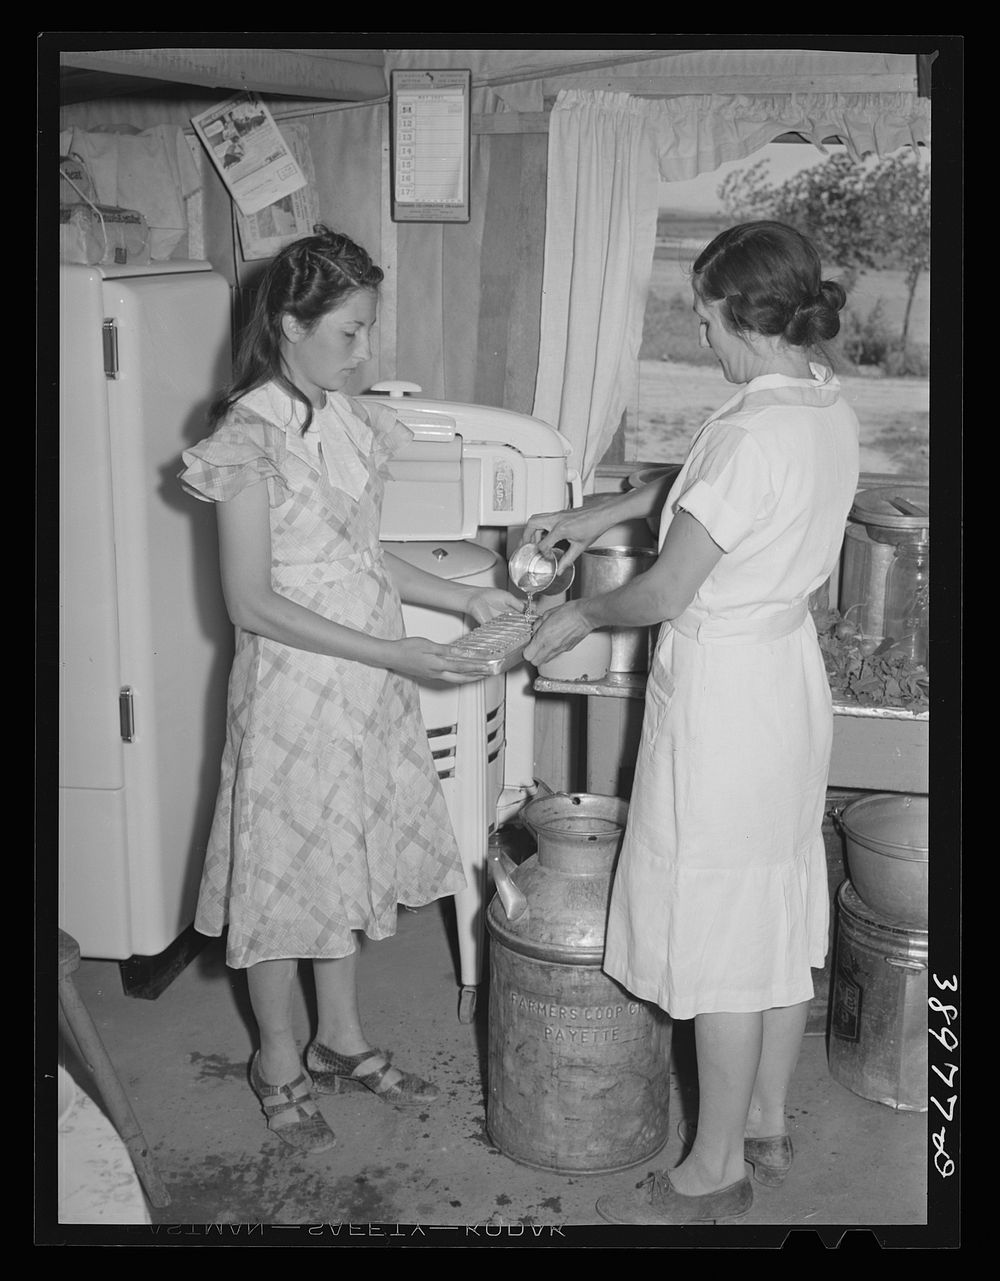 Mrs. Browning and her daughter fill ice trays for electrical refrigeration. They are FSA (Farm Security Administration)…